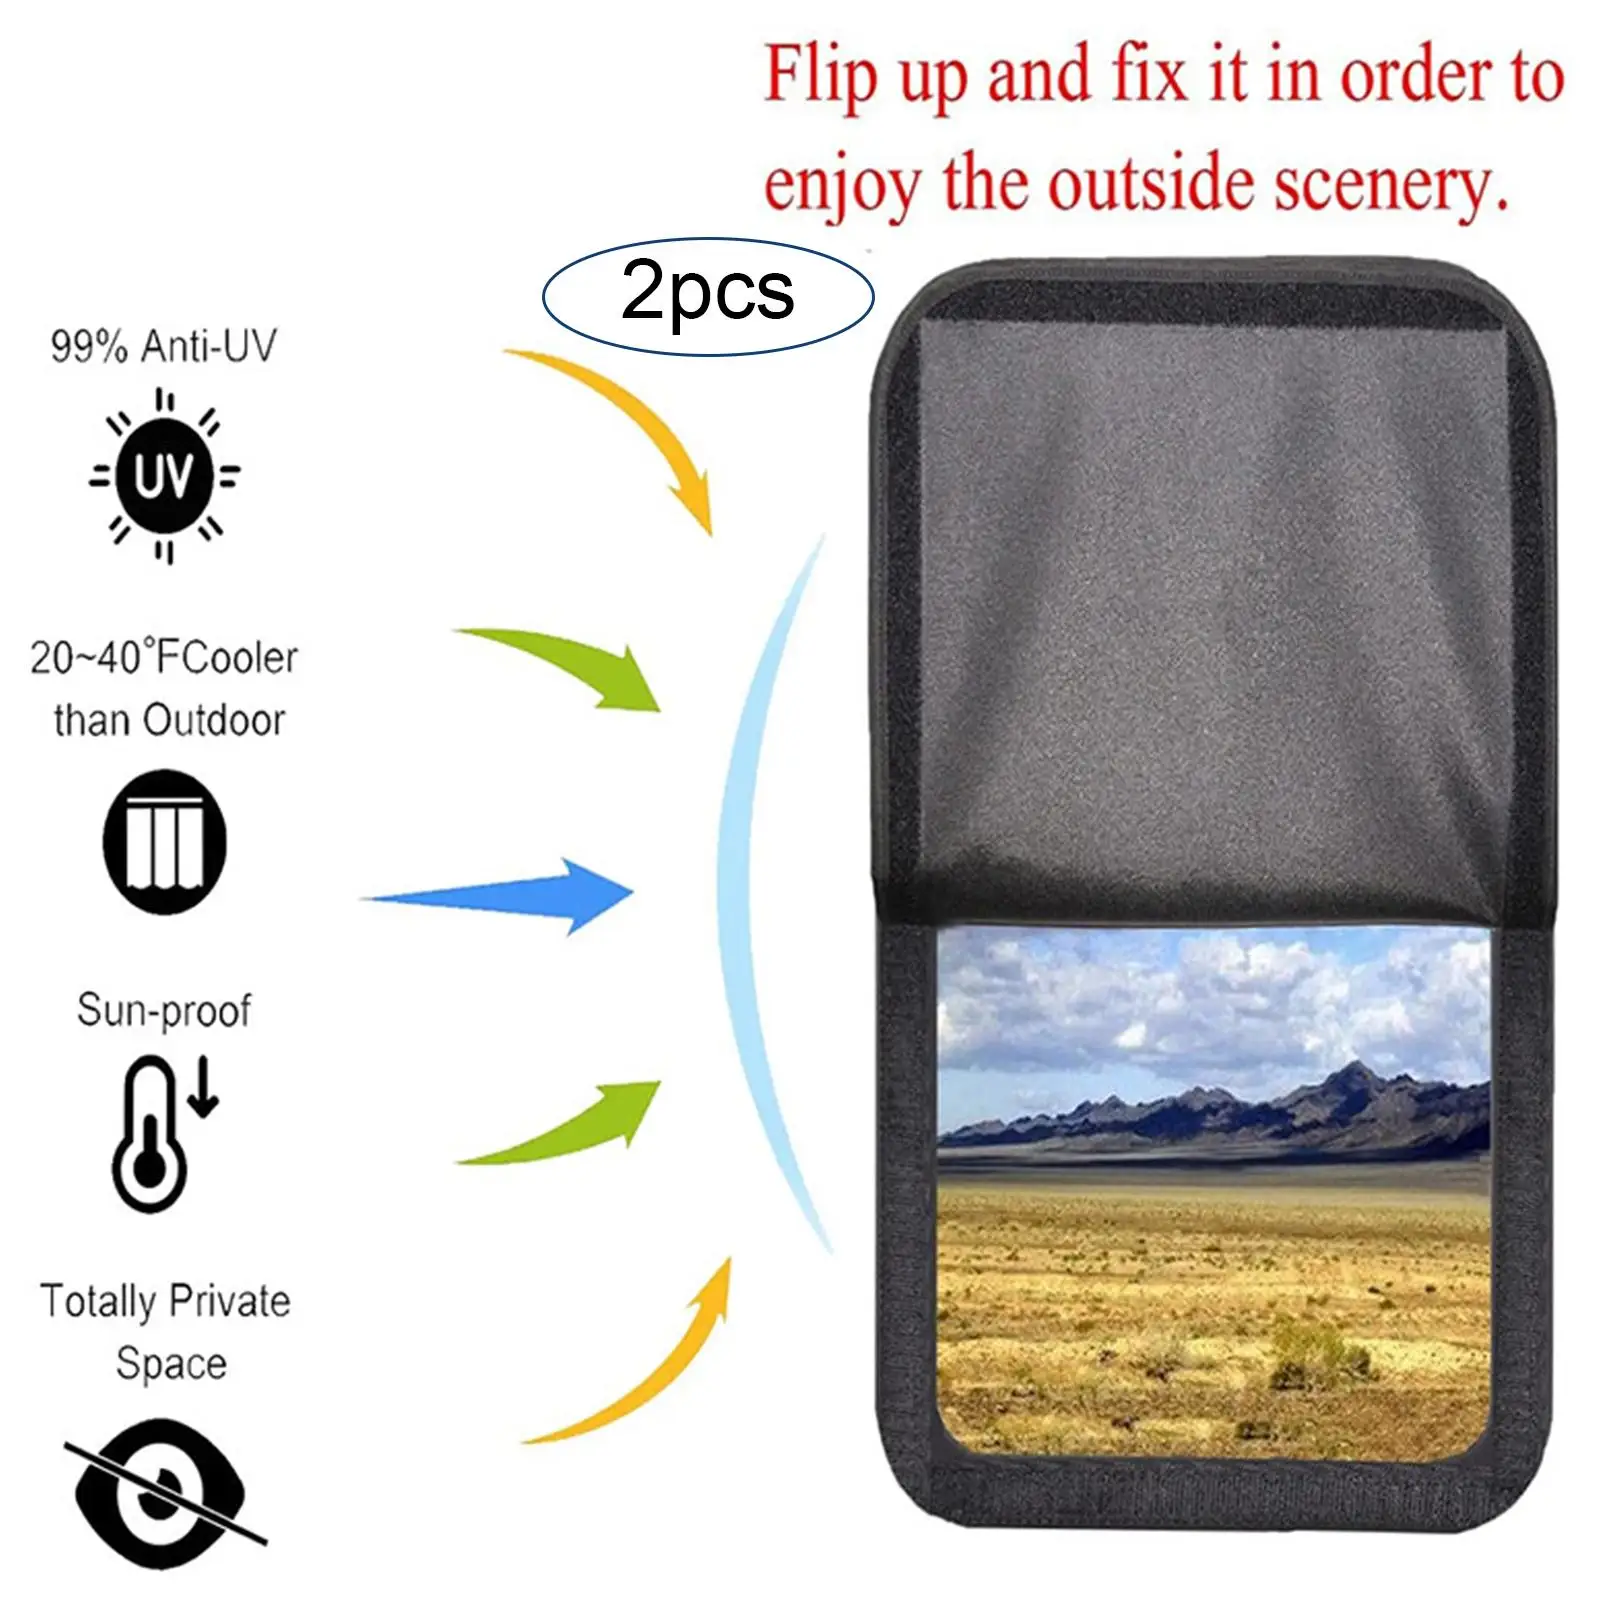 RV Door Window Fabric, Travel Trailer Waterproof Blackout Fabric Black Protective Windshield Privacy Screen Sunshade for Rvs